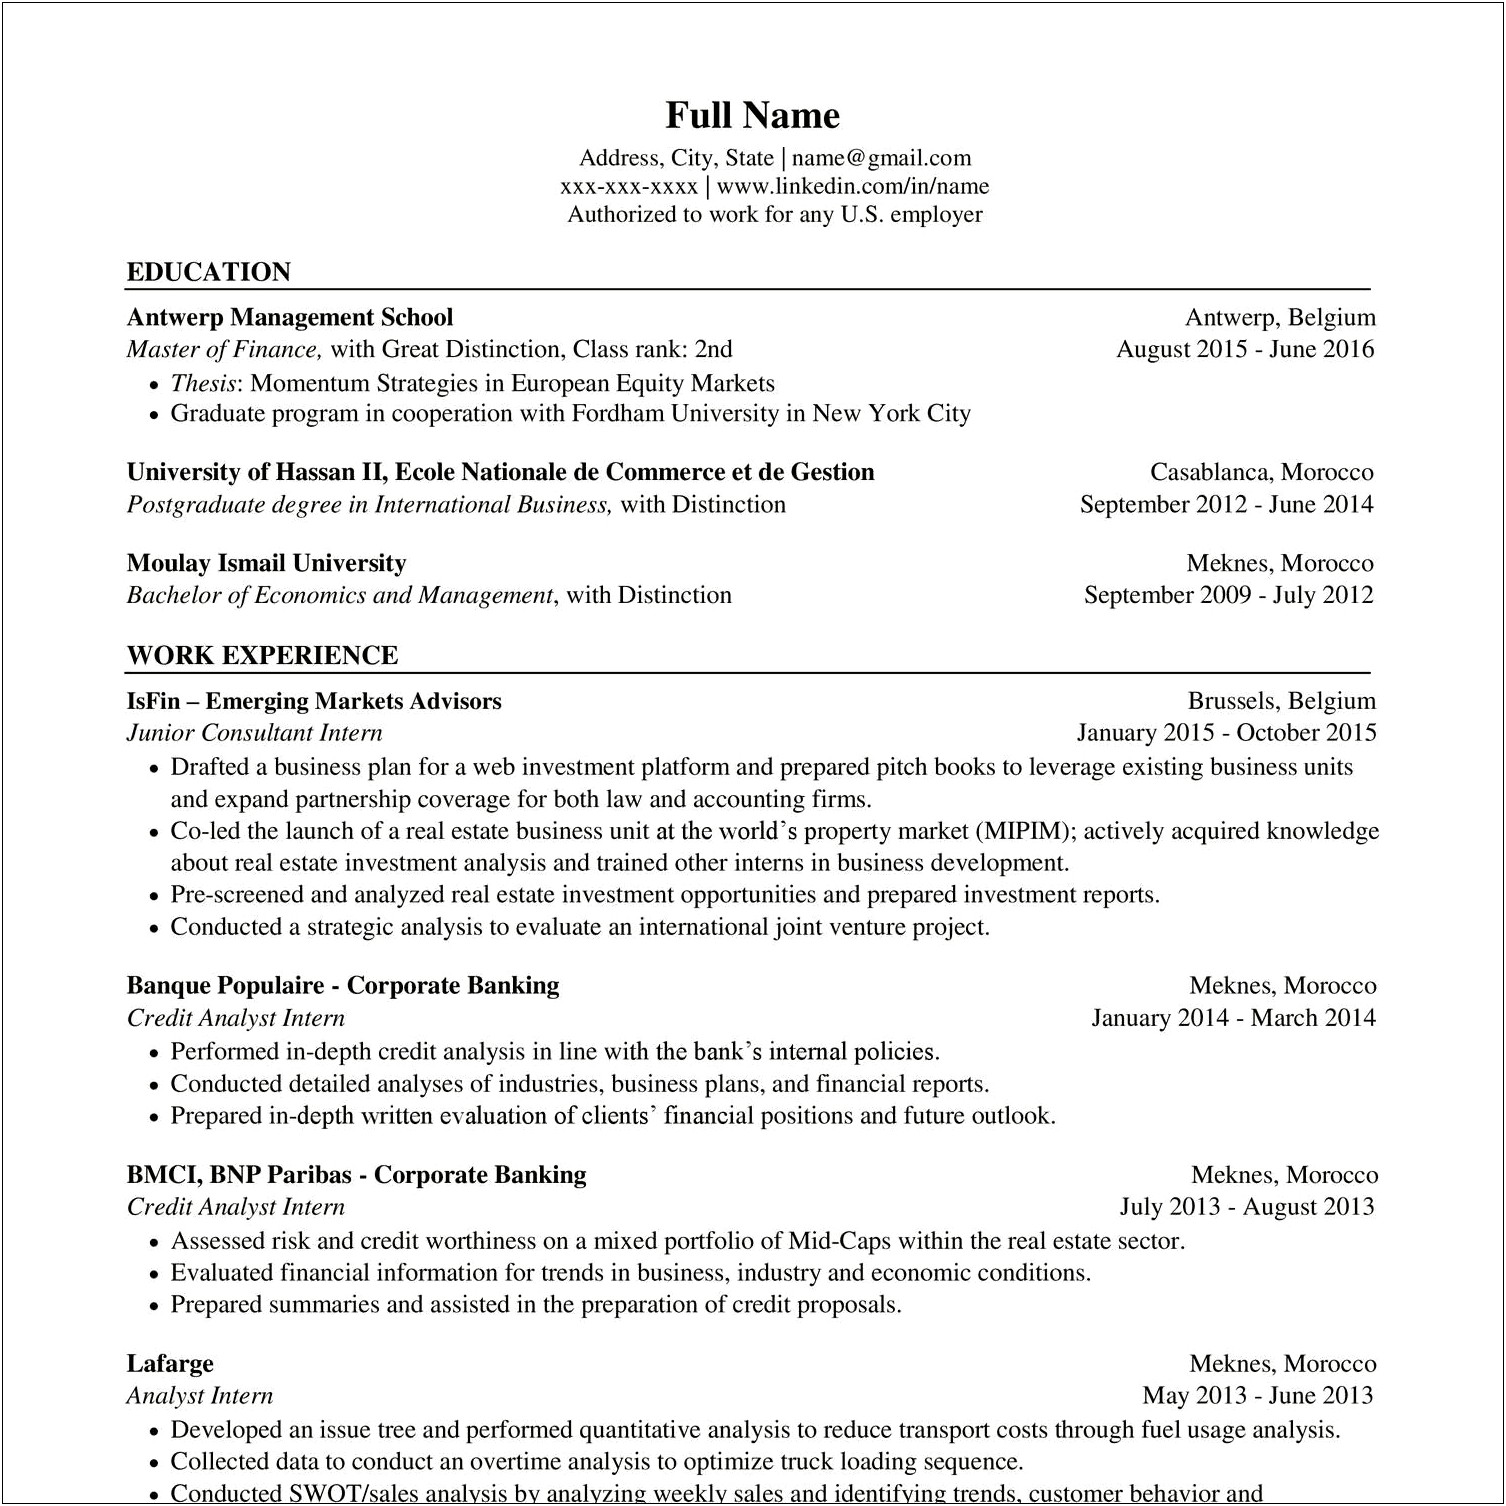 Unique Things To Put On A Resume Reddit